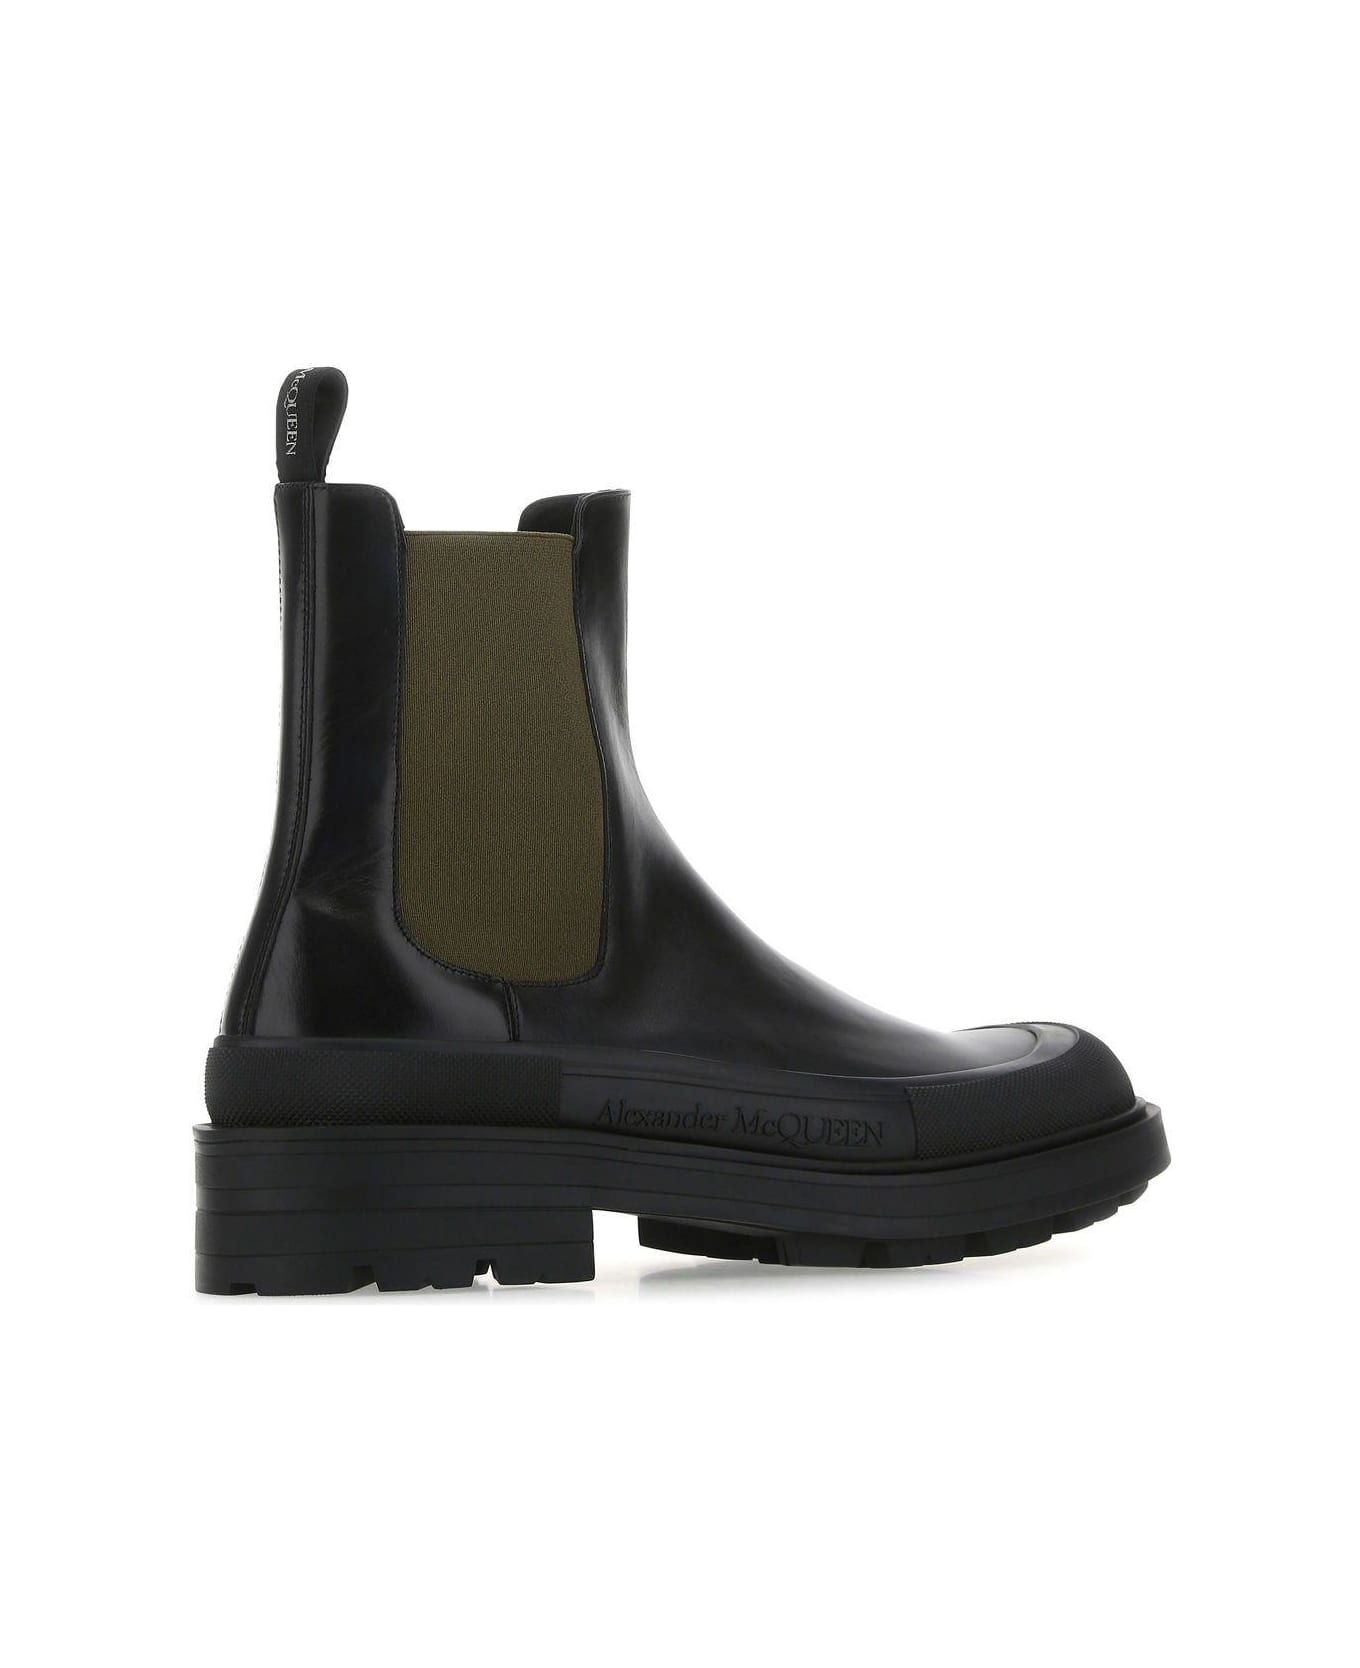 Alexander McQueen Black Leather Boxcar Ankle Boots - BLACK ブーツ